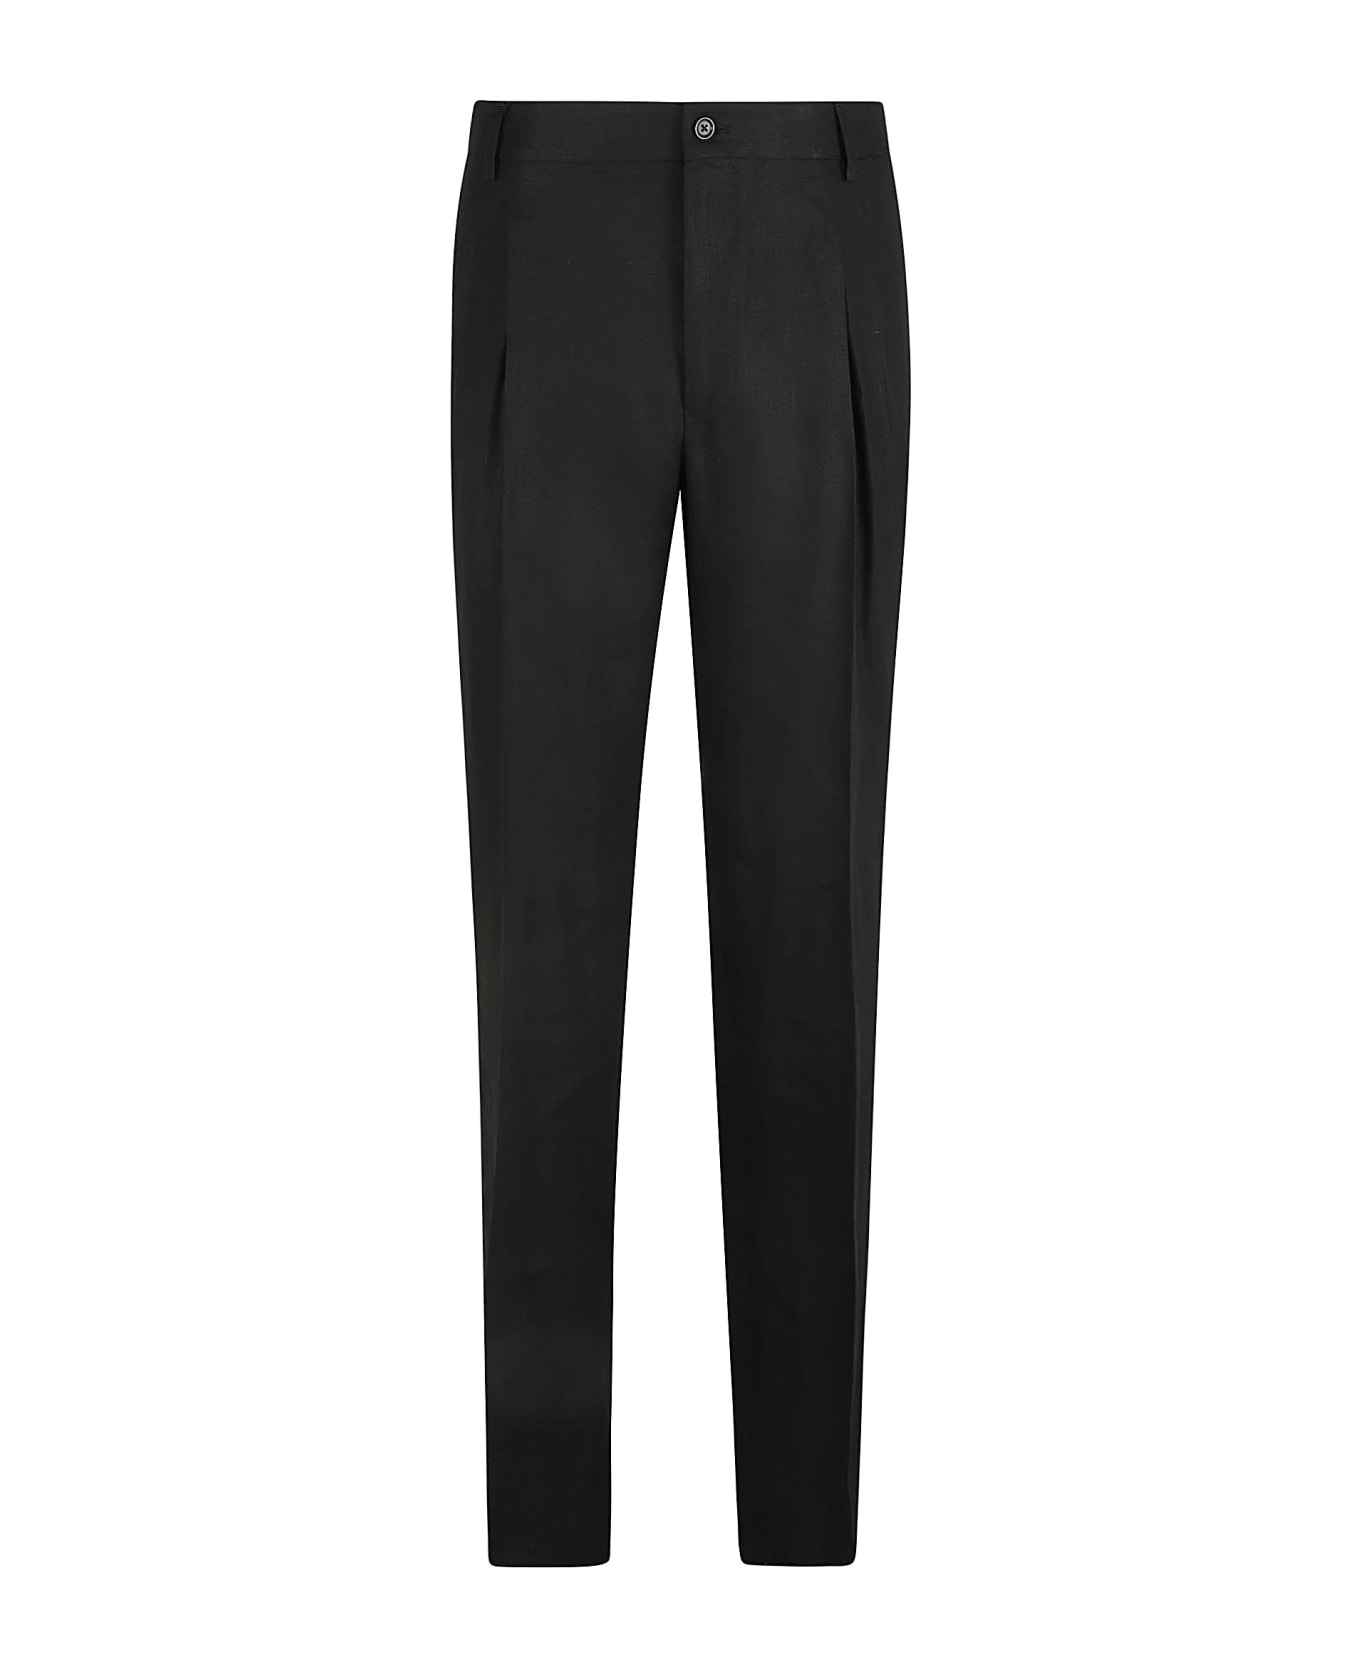 Dolce & Gabbana Classic Fitted Trousers - Black ボトムス